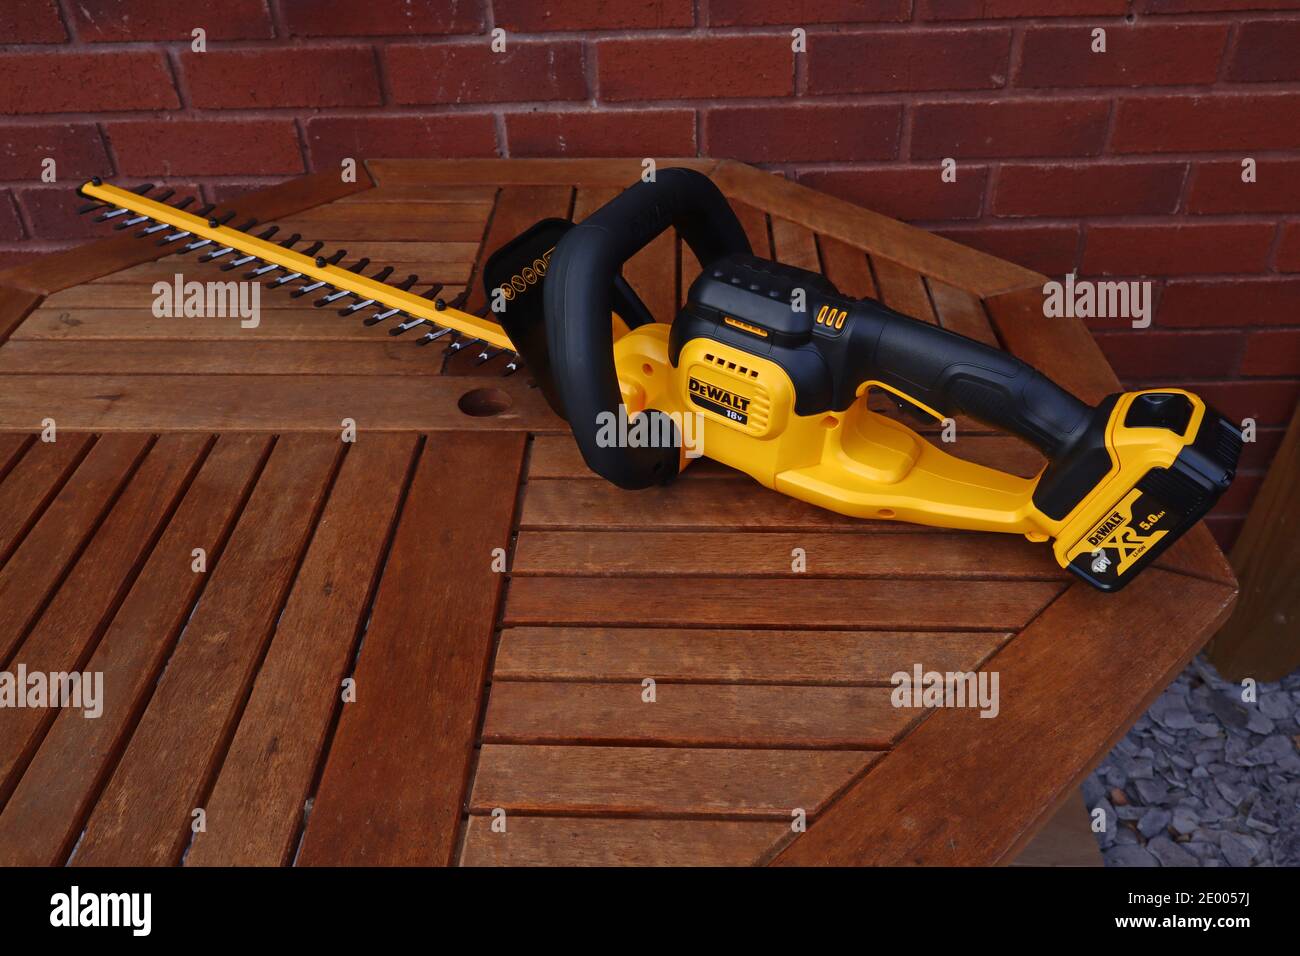 EXETER, DEVON, ENGLAND - SEPTEMBER 23RD 2020: Dewalt 18 volt cordless hedge  trimmer rests on a garden table ready to be put to use Stock Photo - Alamy